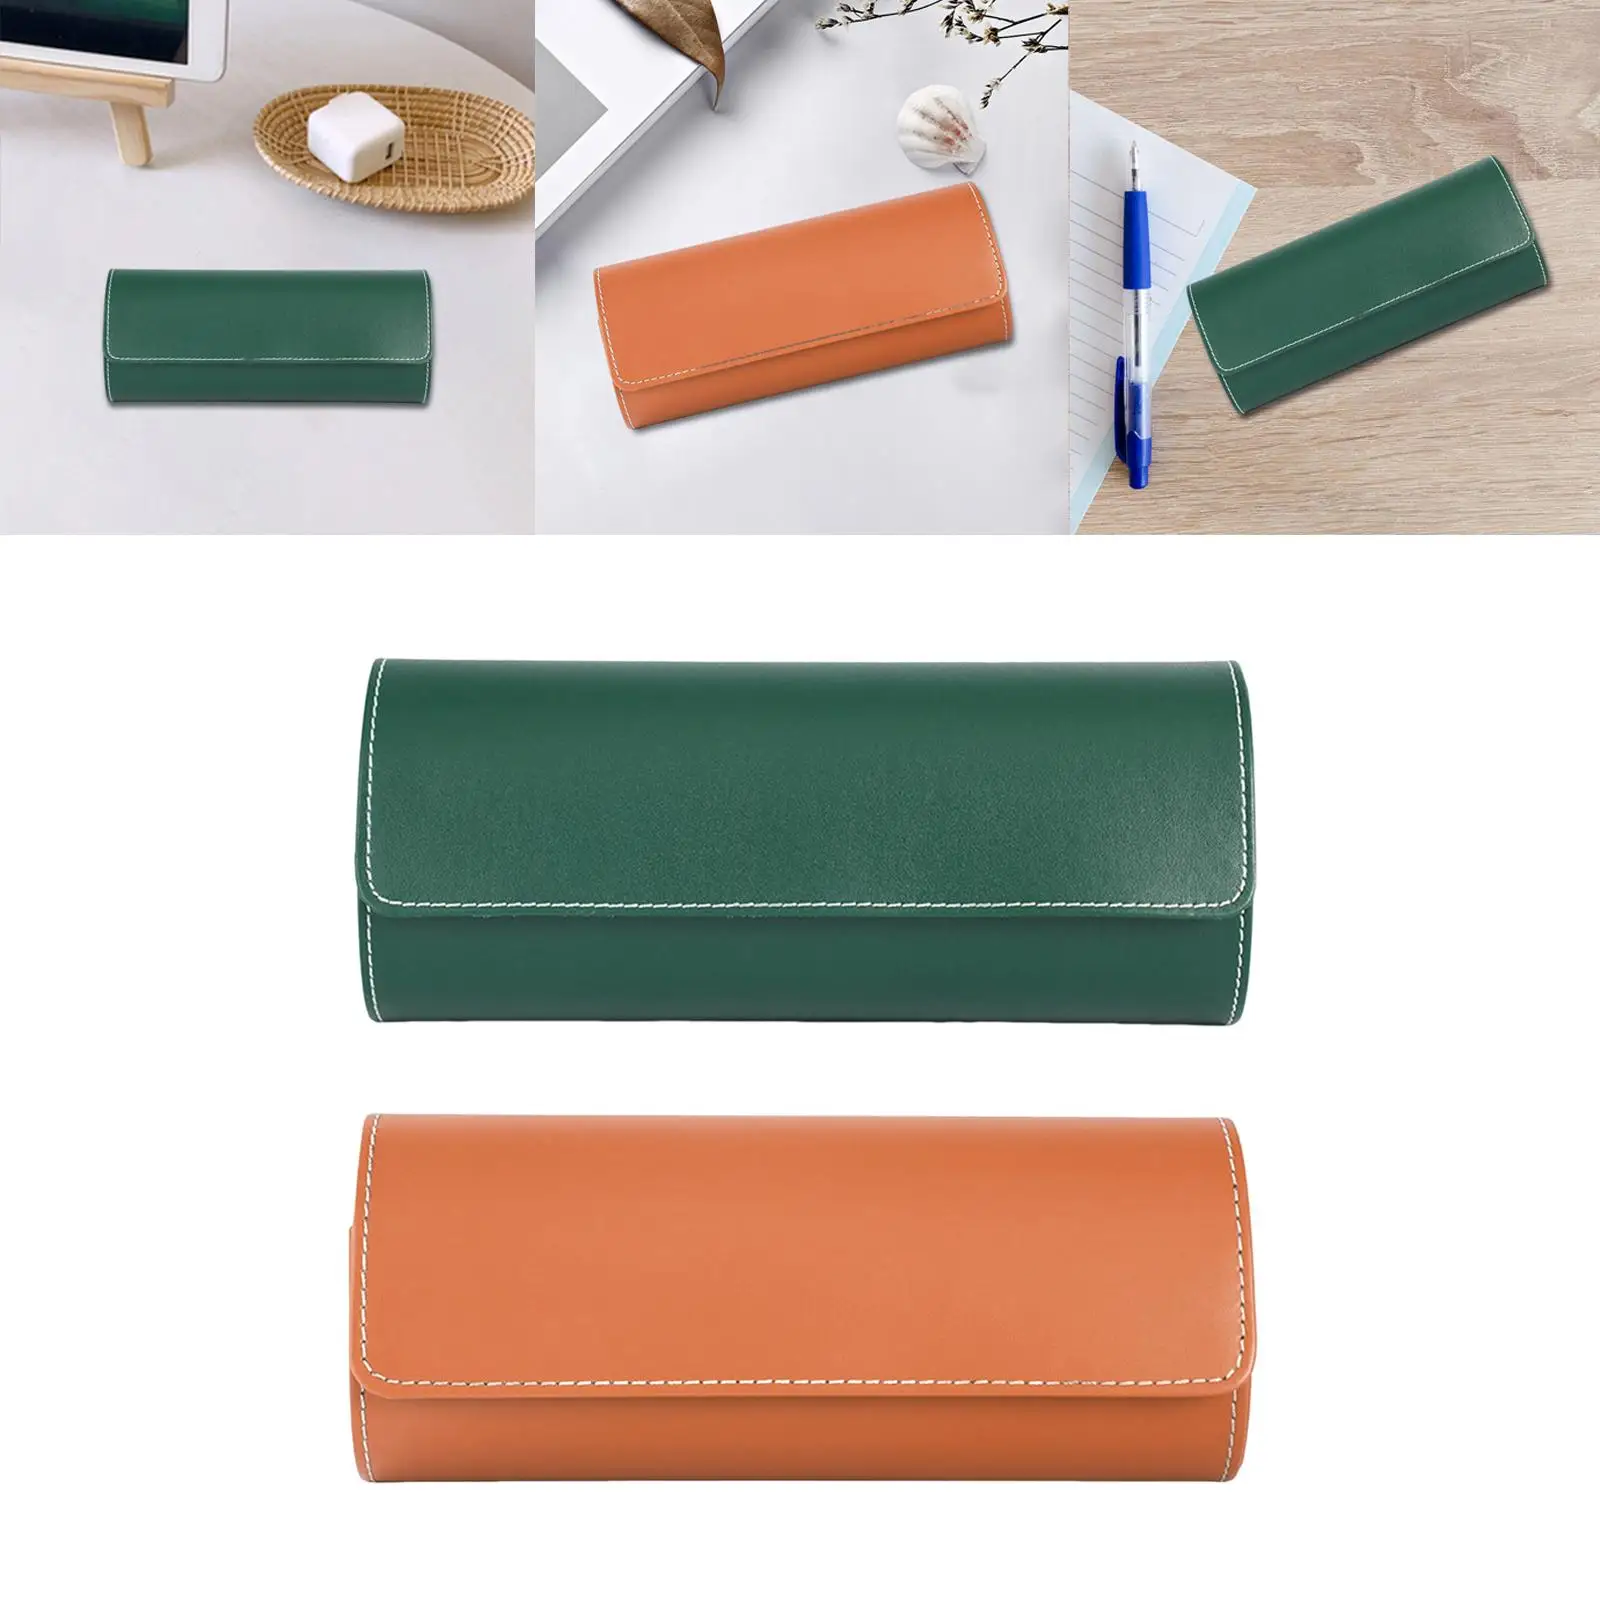 Watch Roll Case, with Removable Pillows, PU Leather Slots Organizer Watch Travel Case,